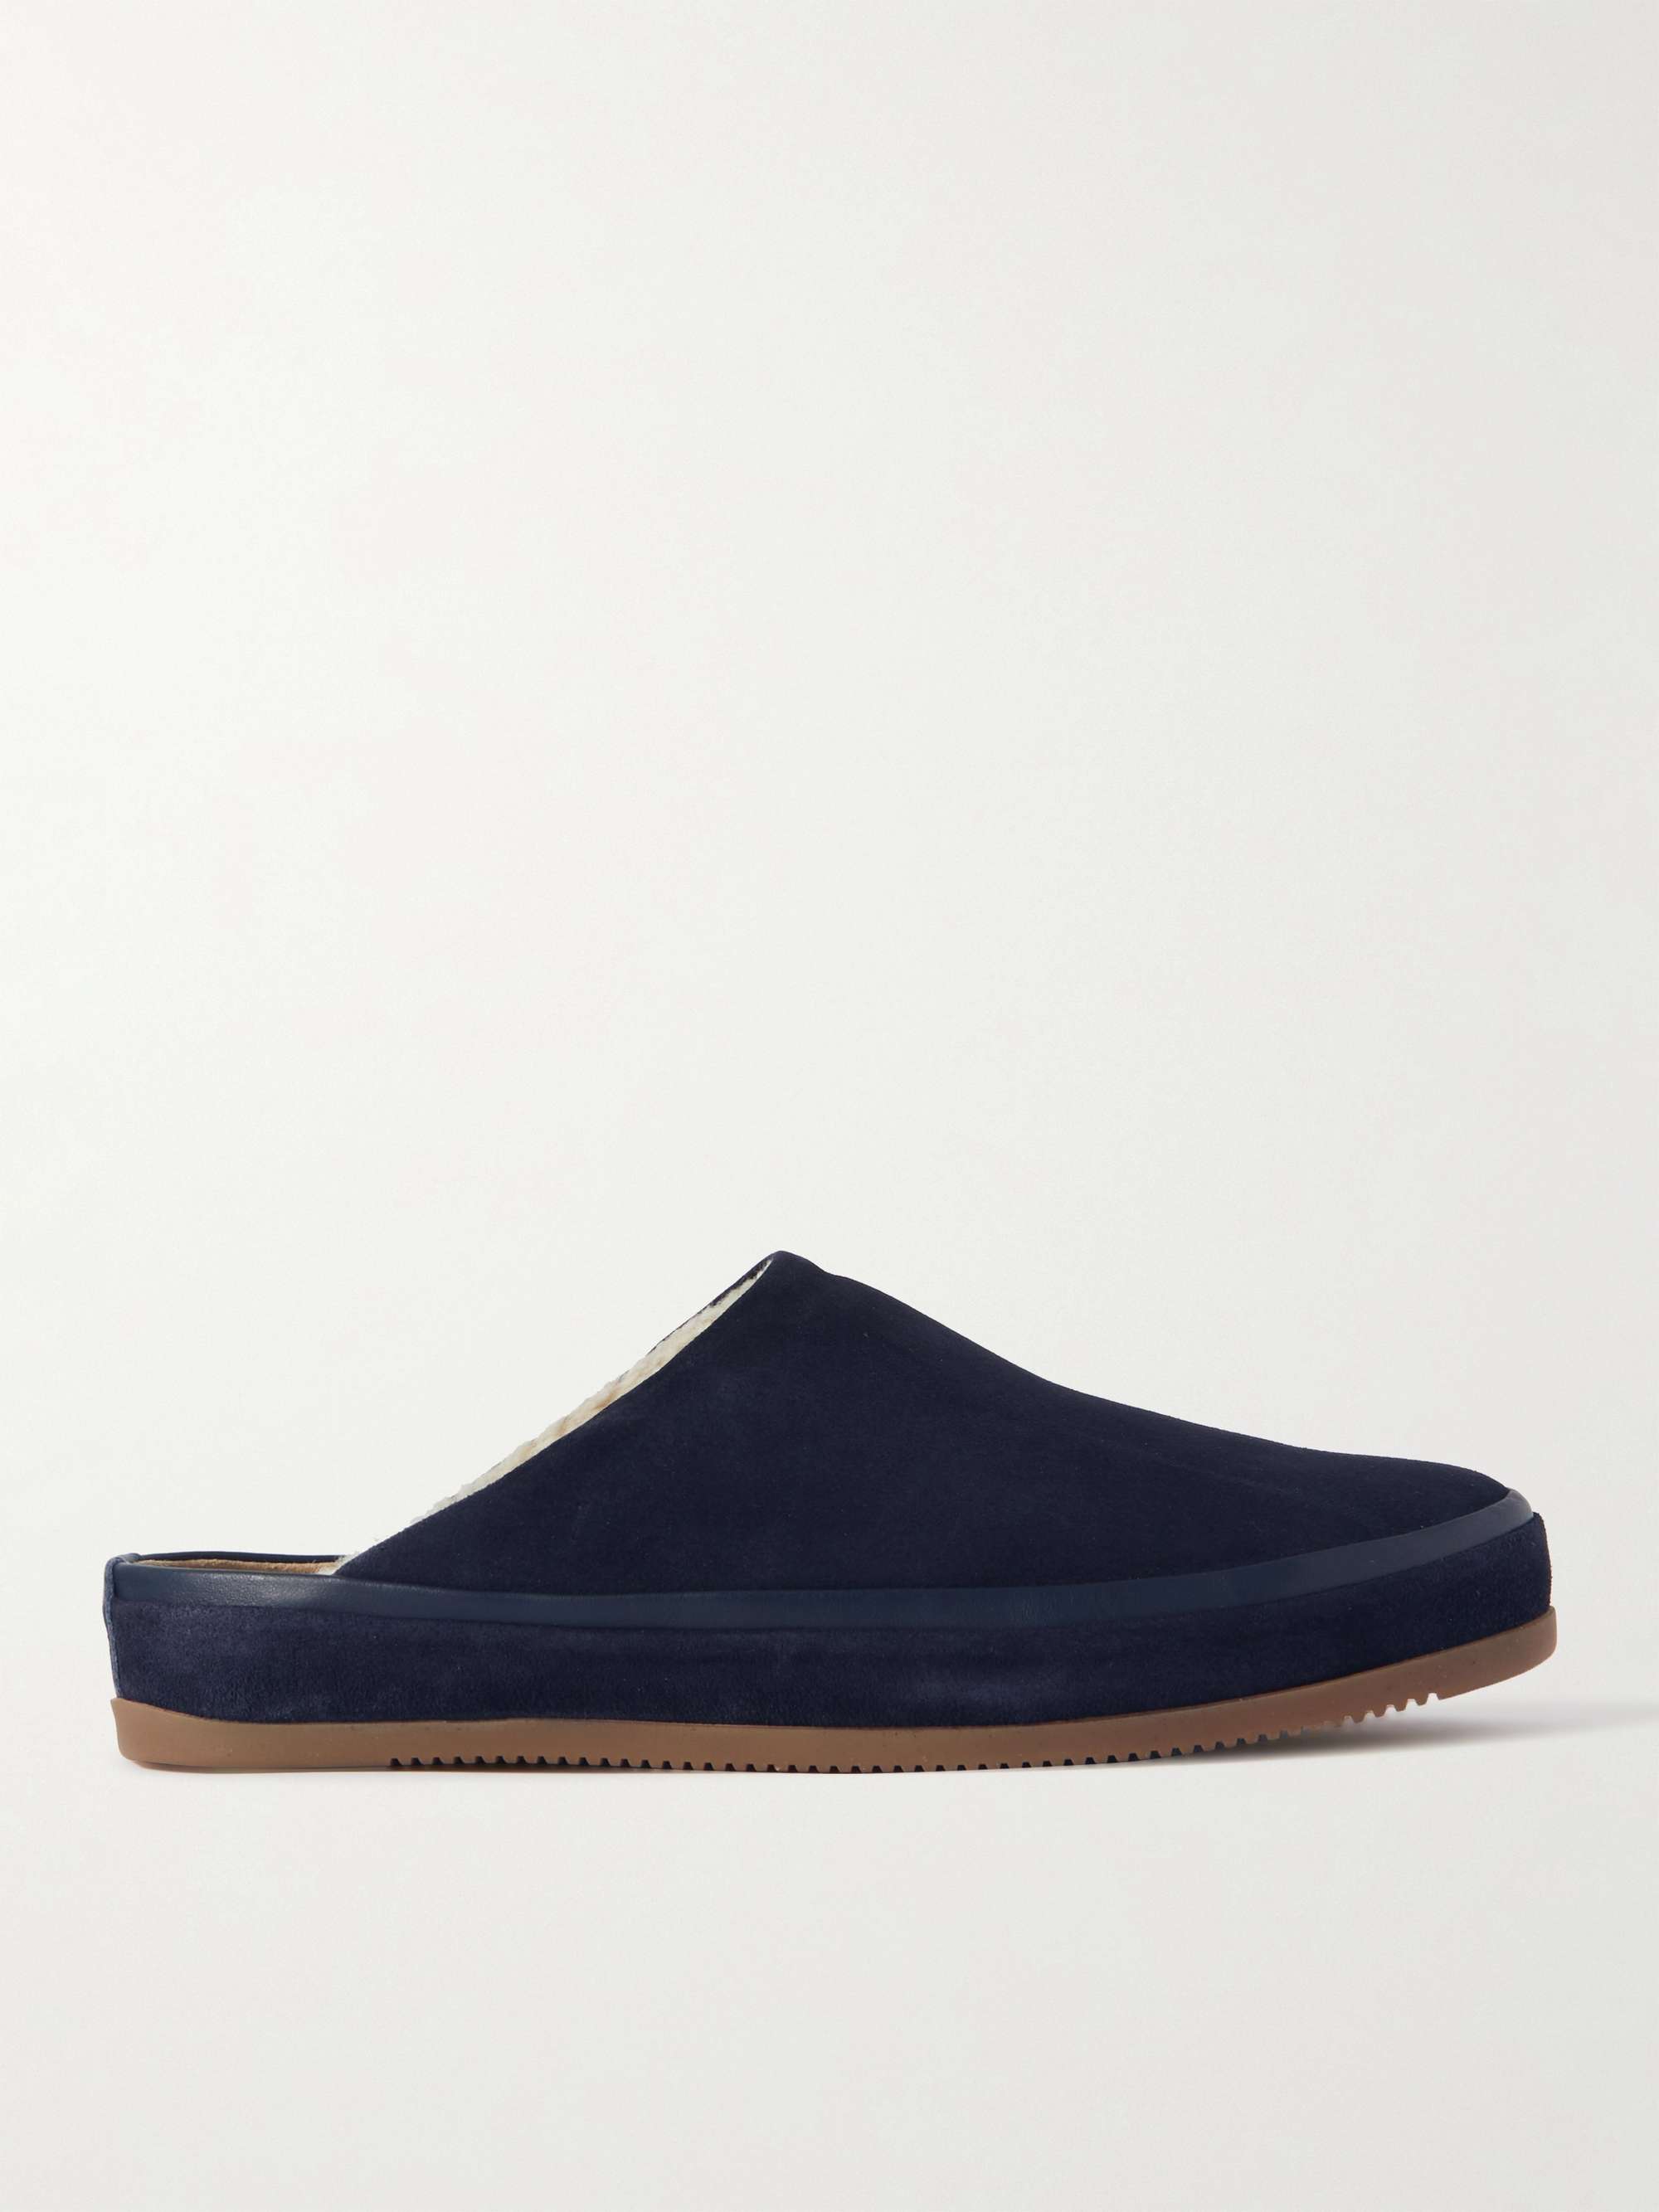 MULO Shearling-Lined Suede Slippers | MR PORTER